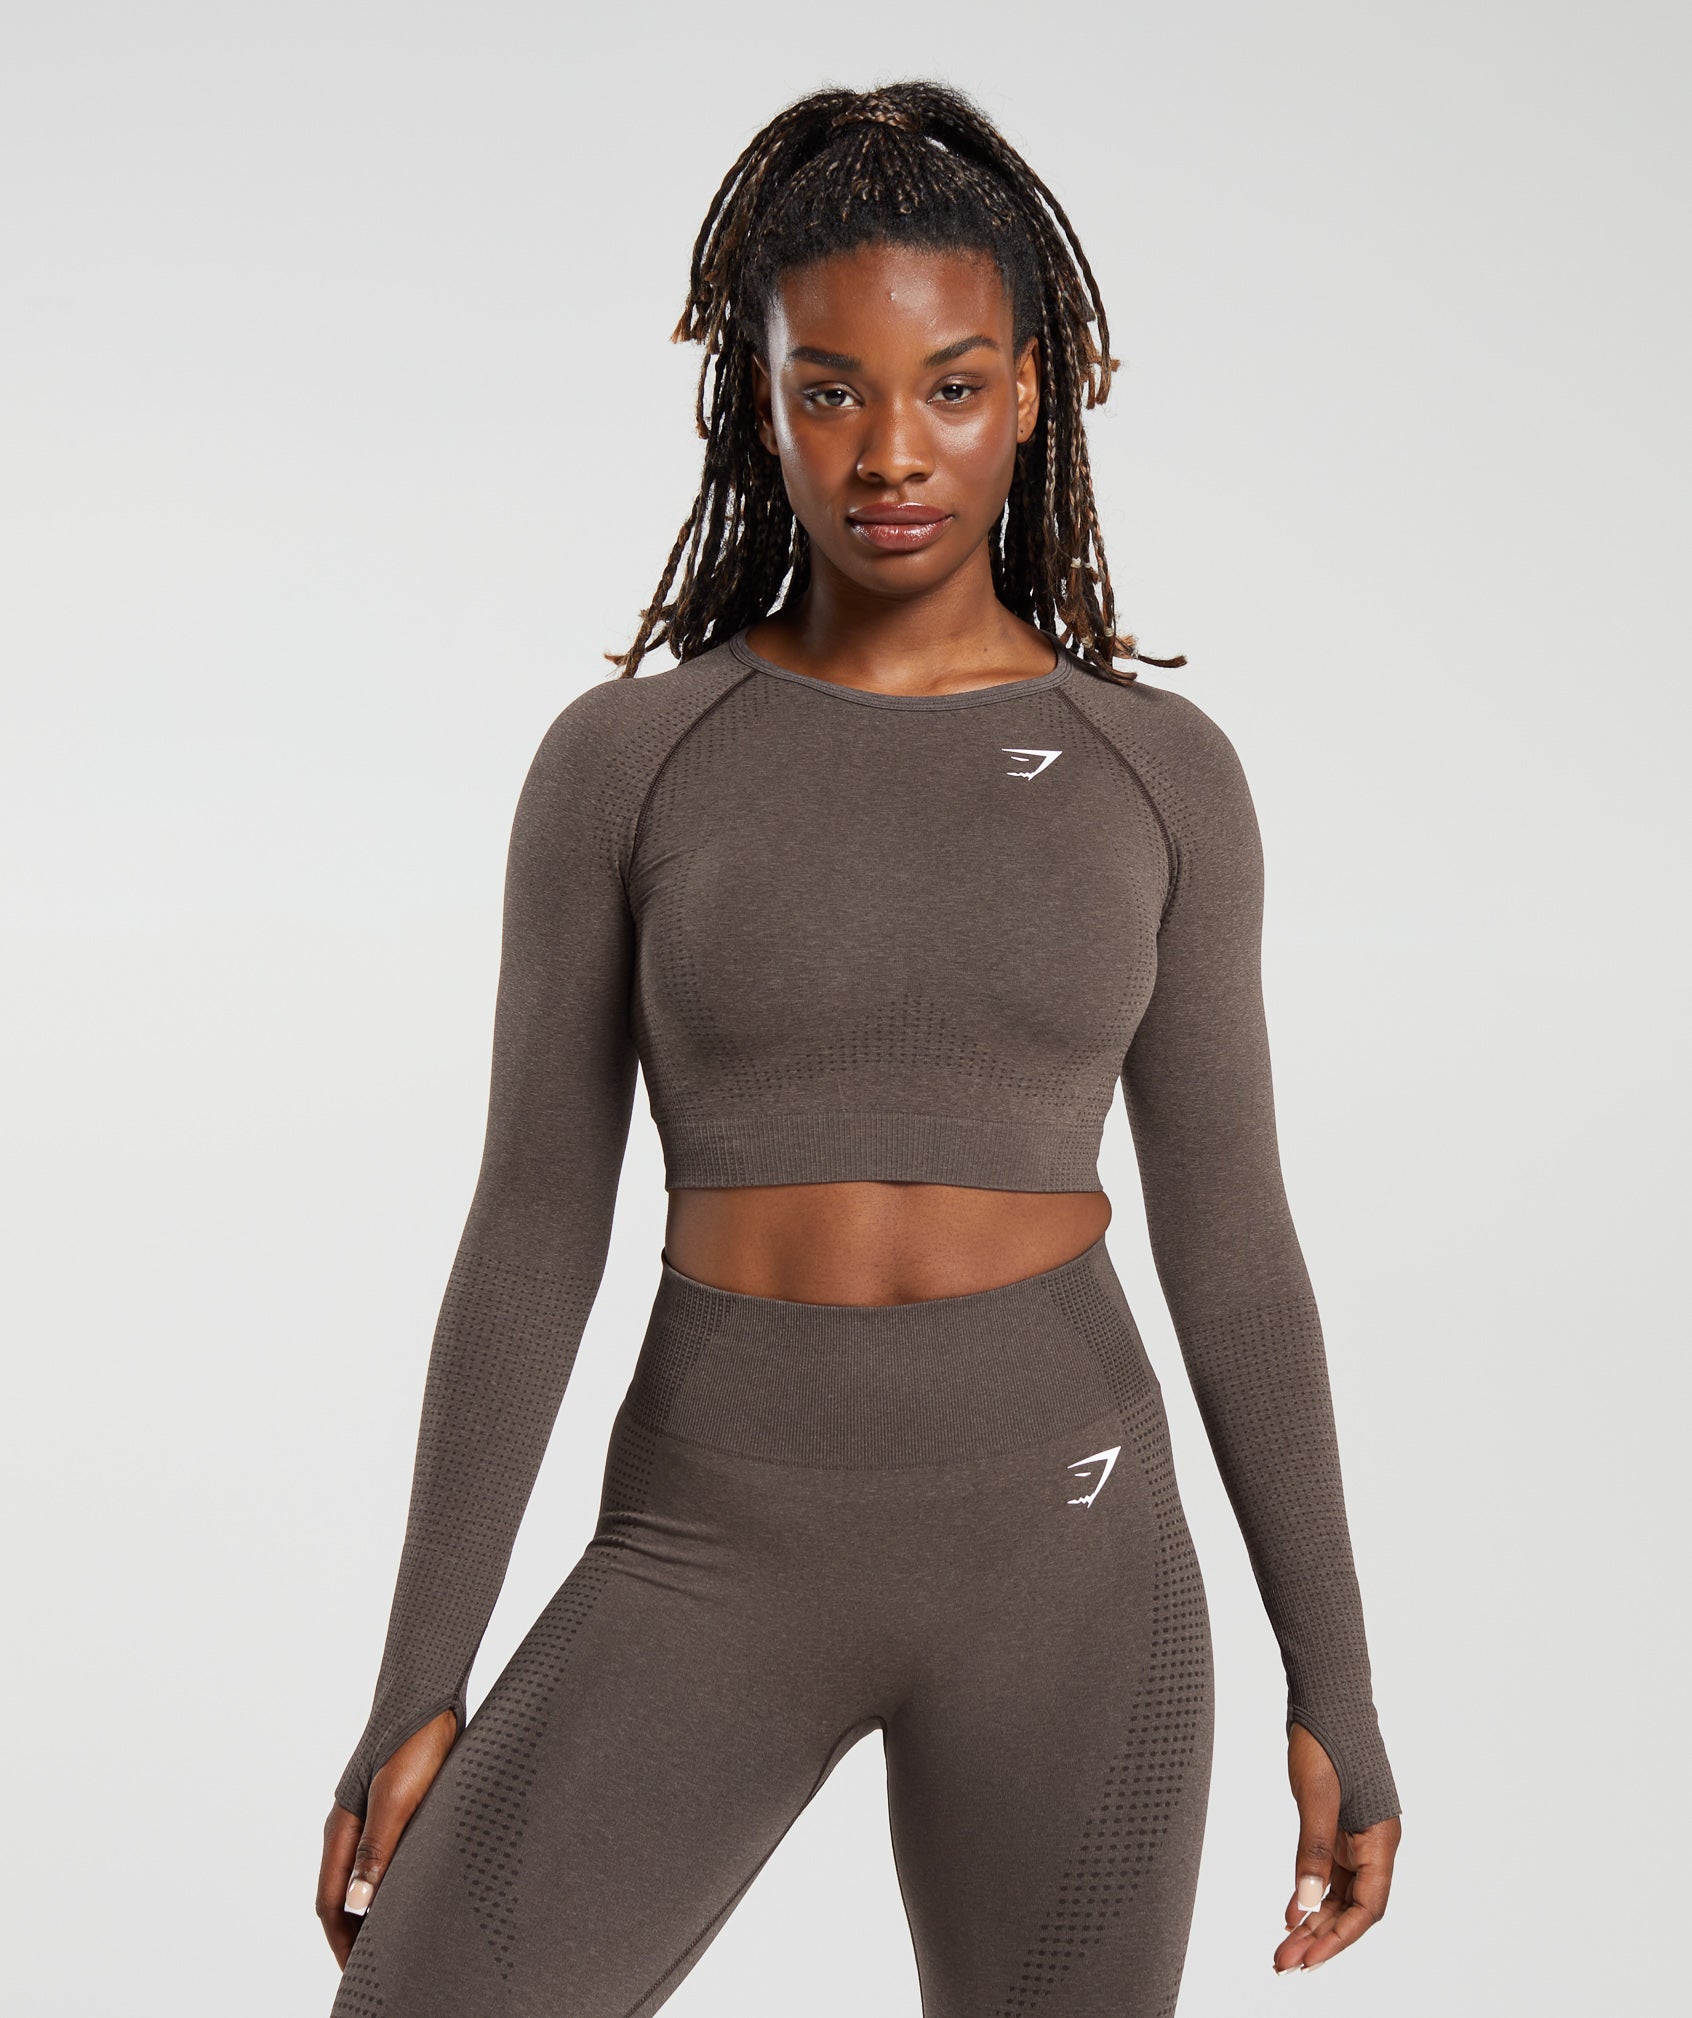 Cropped Long Sleeve Workout Tops